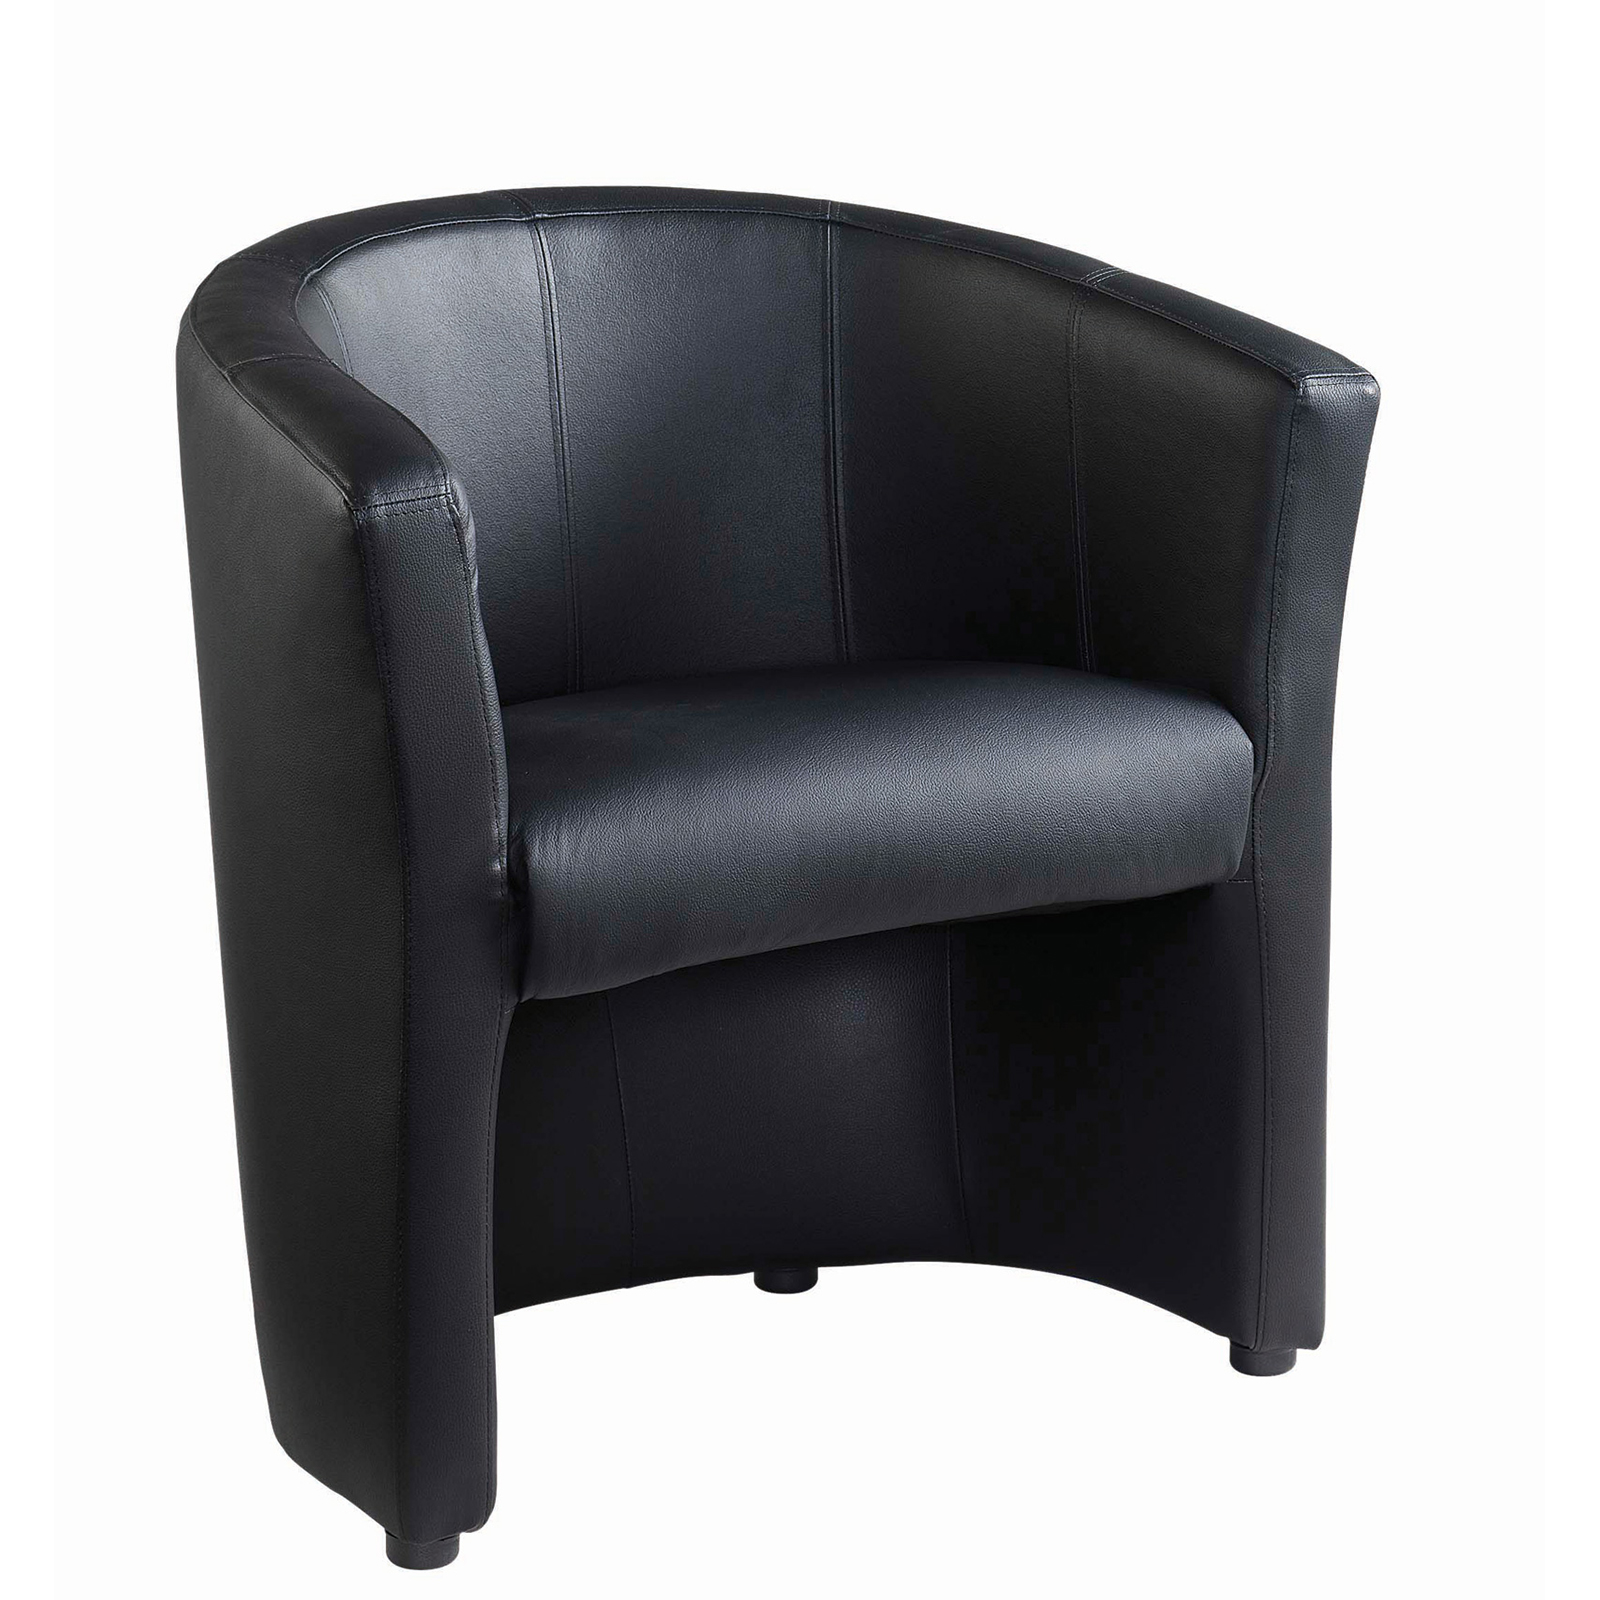 Reception Chairs London reception single tub chair 670mm wide - black faux leather